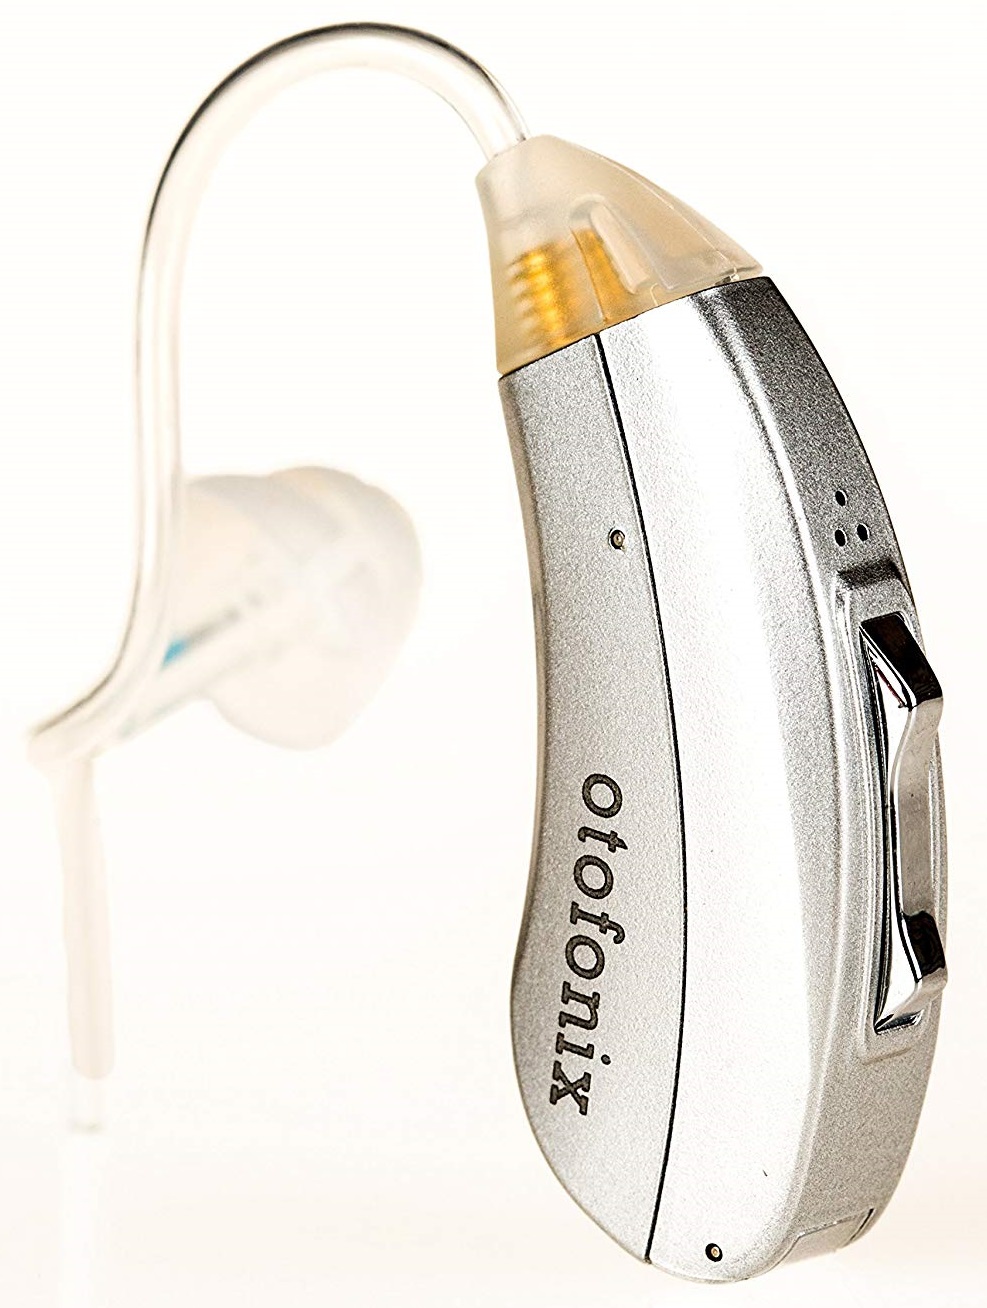 Best Hearing Aids For Severe HighFrequency Hearing Loss 2020